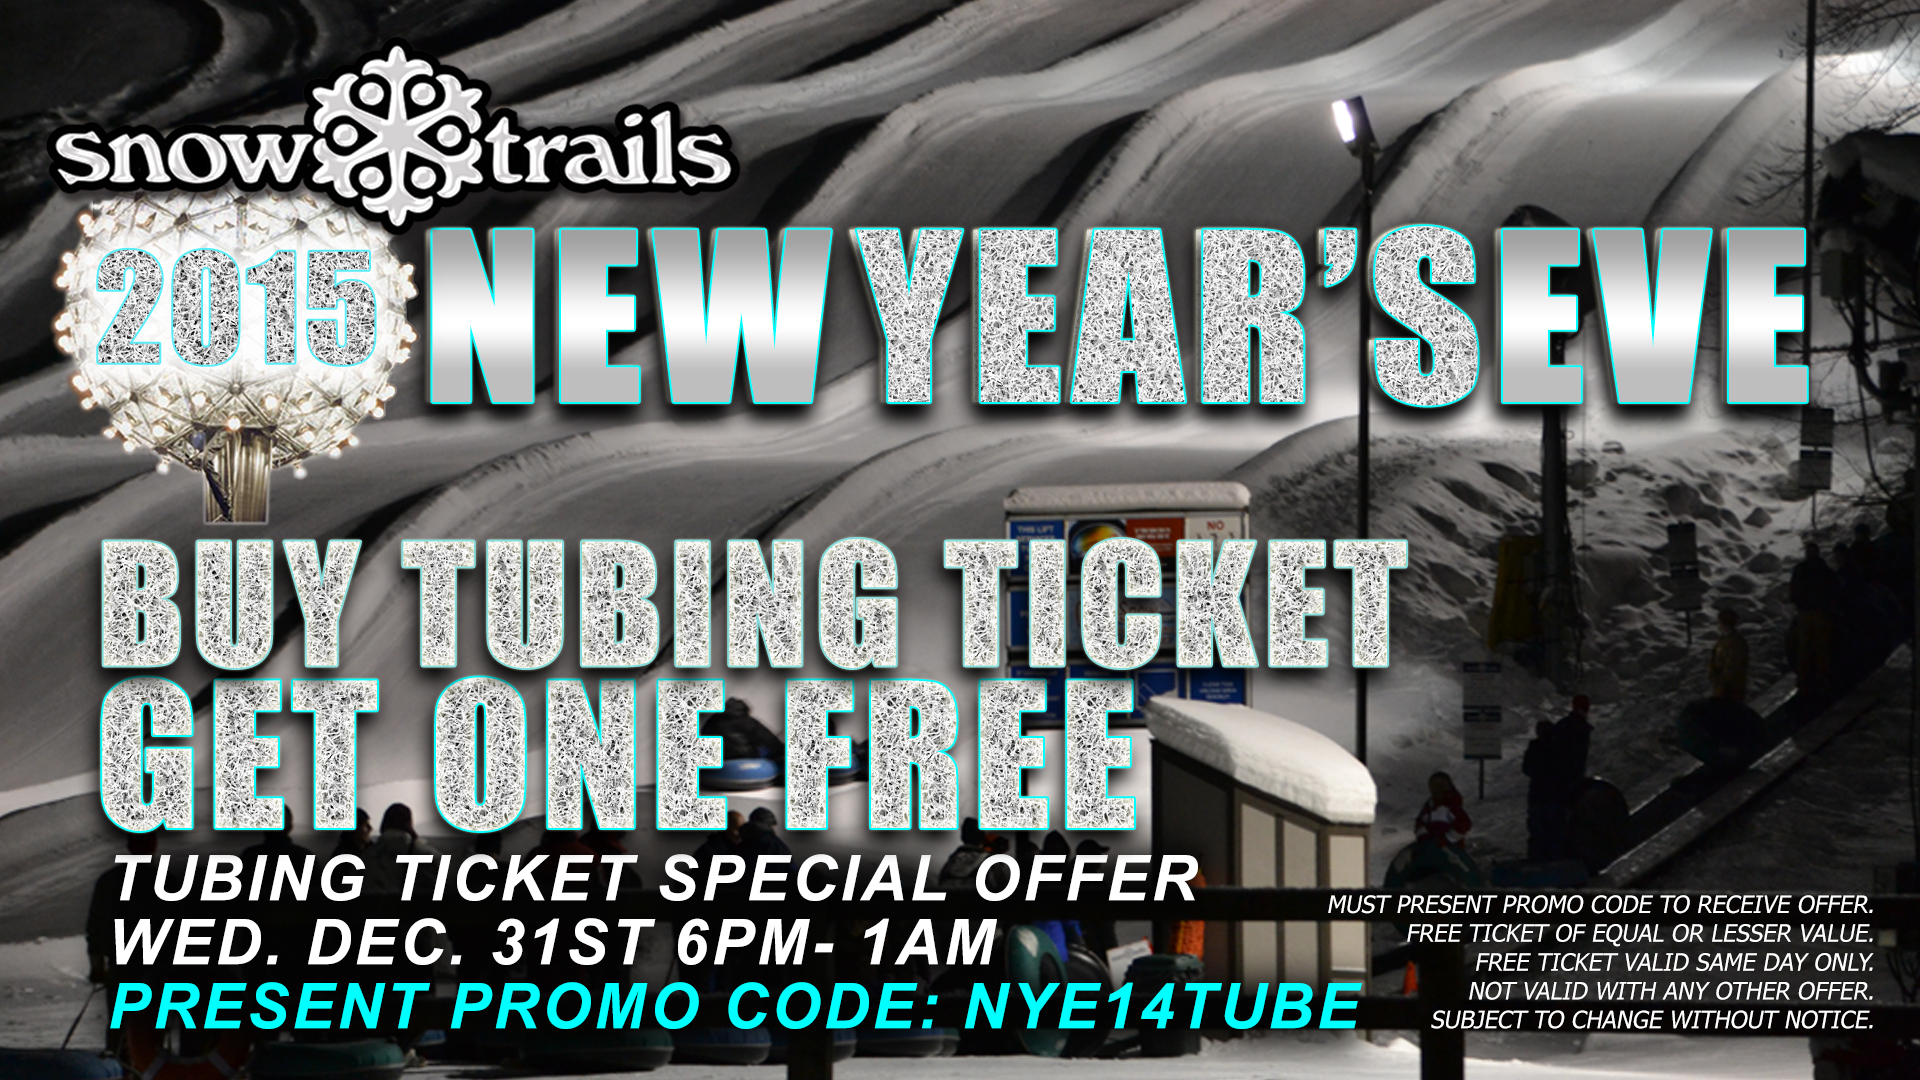 New Year's Eve Snow Tubing Special Buy One Get One Offer at Snow Trails Vertical Descent Tubing Park